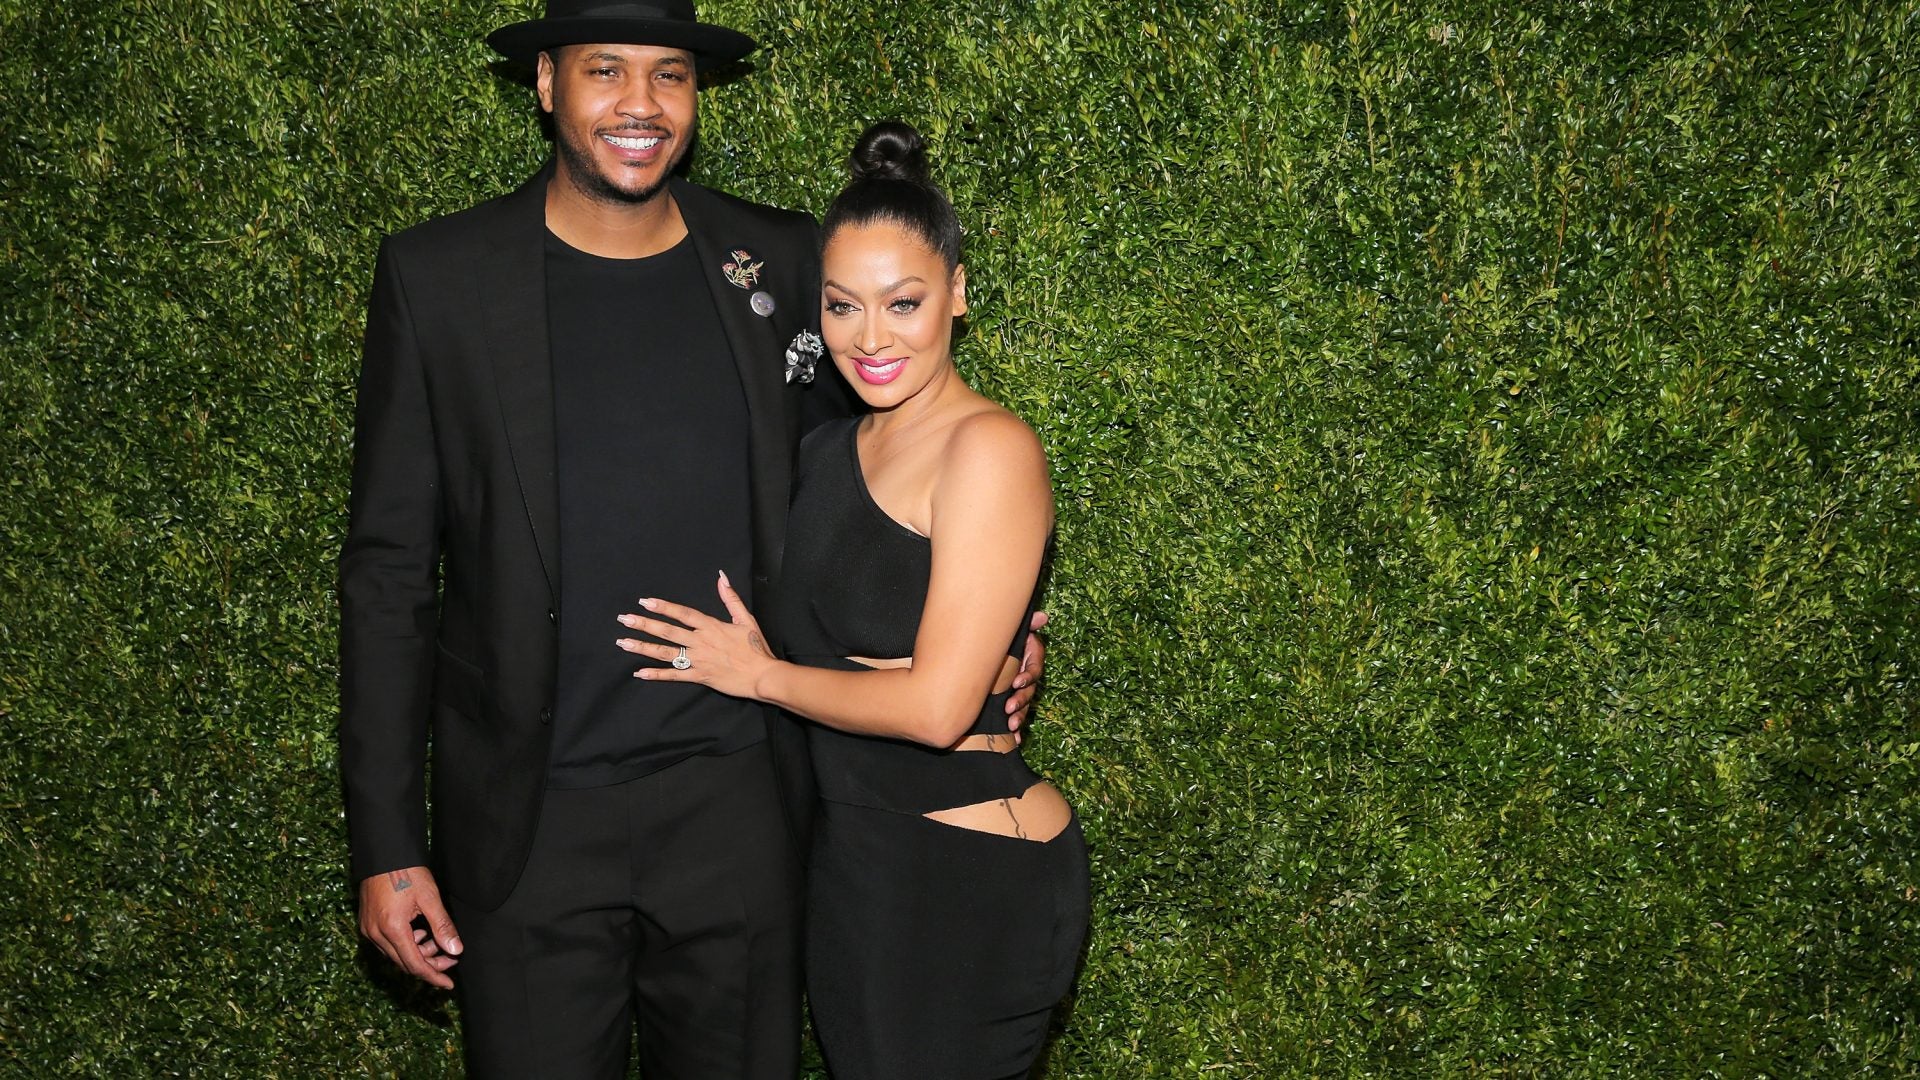 It's Really Over: Lala Anthony Reportedly Files For Divorce From Carmelo Anthony After 11 Years Of Marriage